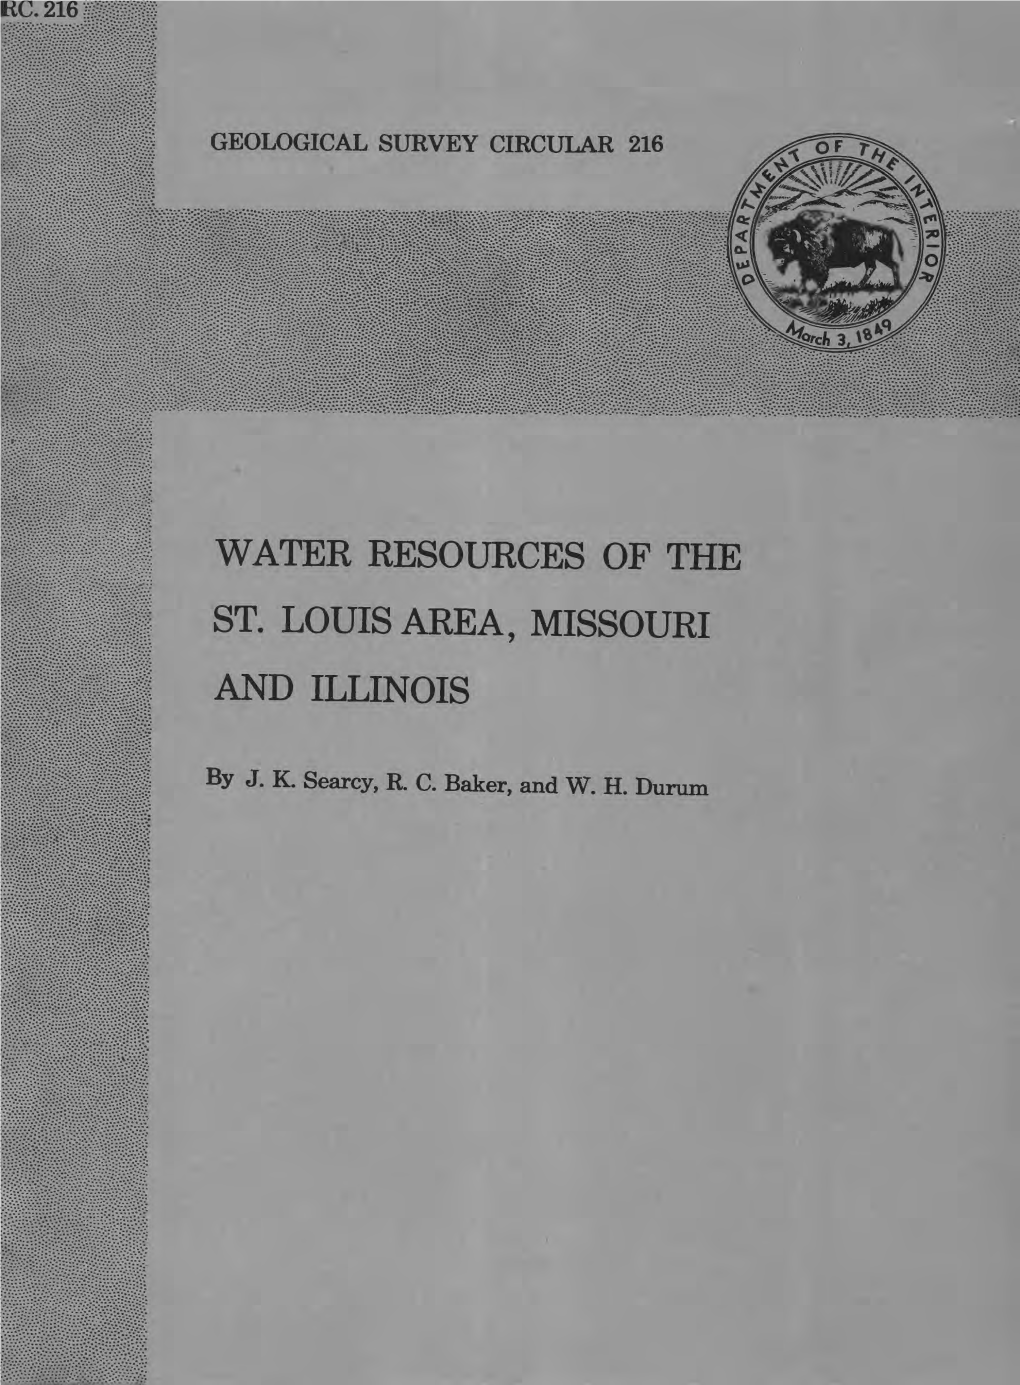 Water Resources of the St. Louis Area, Missouri and Illinois